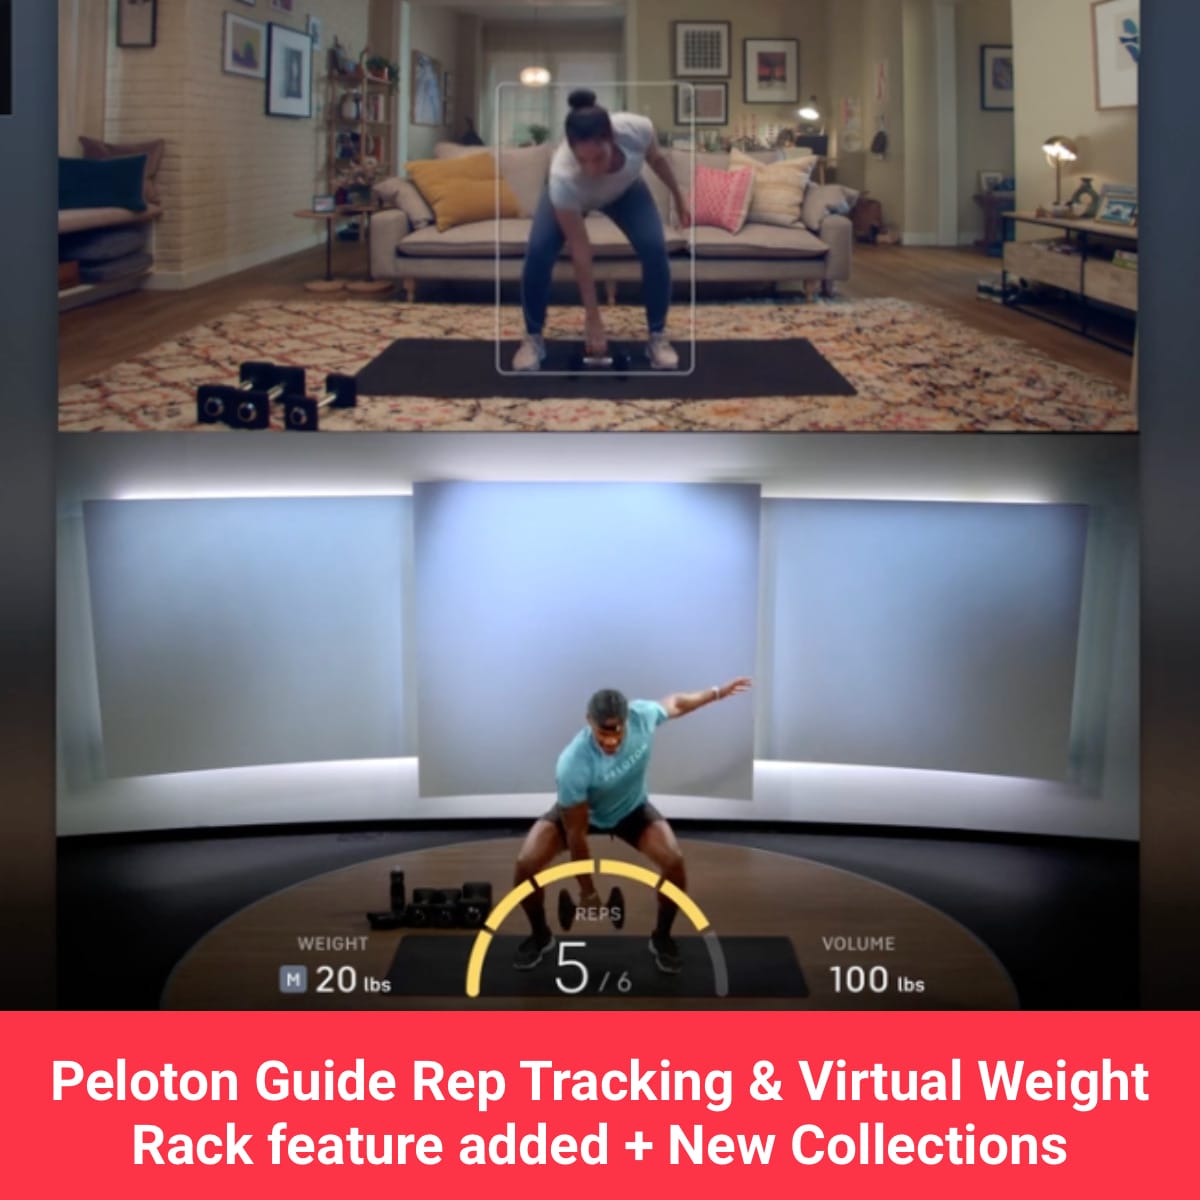 Peloton Rep Tracking & Virtual Weight featured added + Collections - Peloton Buddy